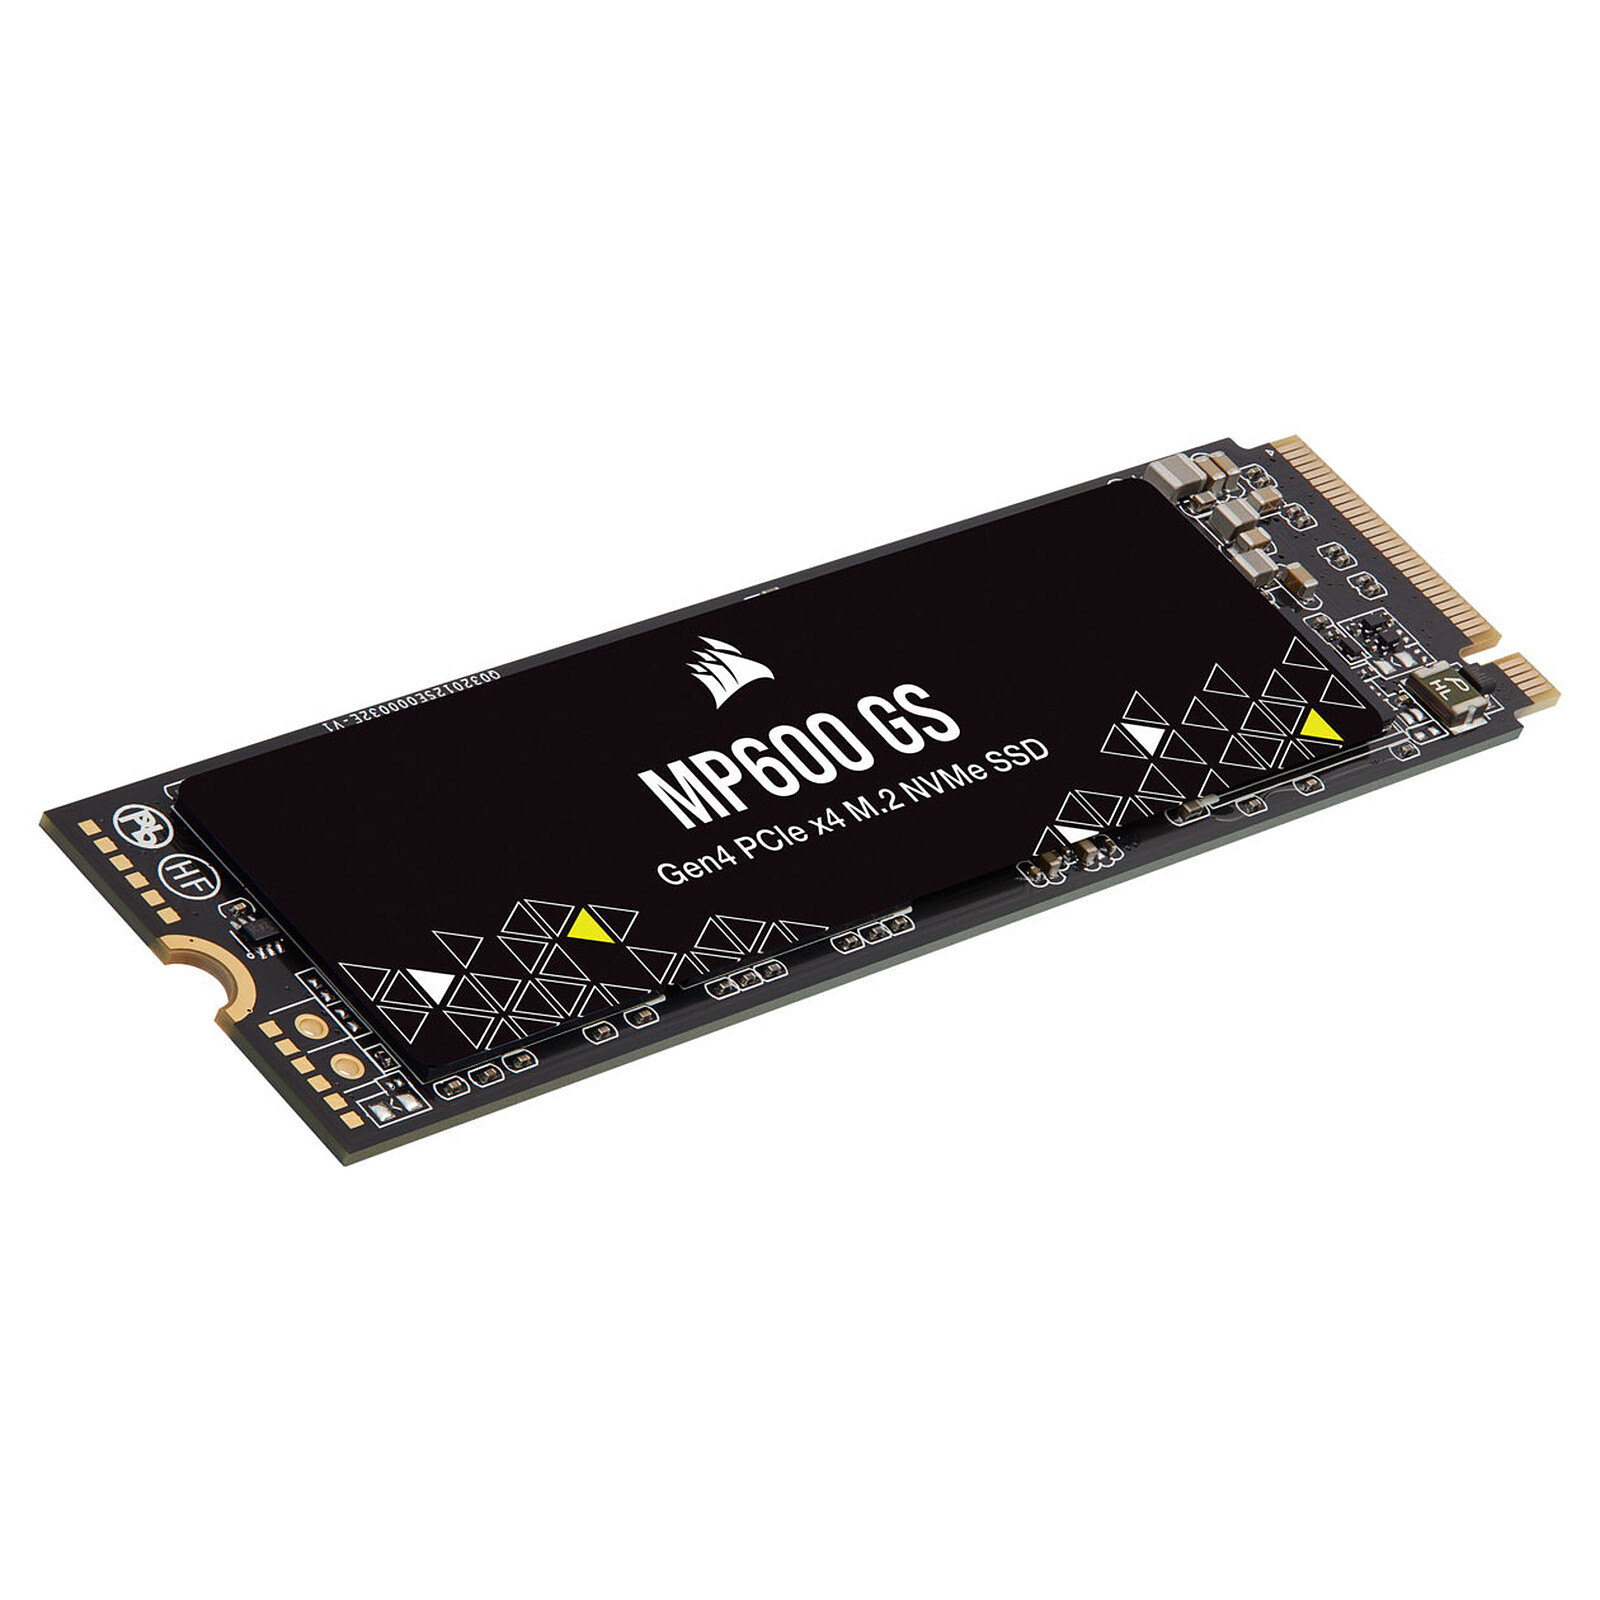 Corsair Force GS 240GB SSD review